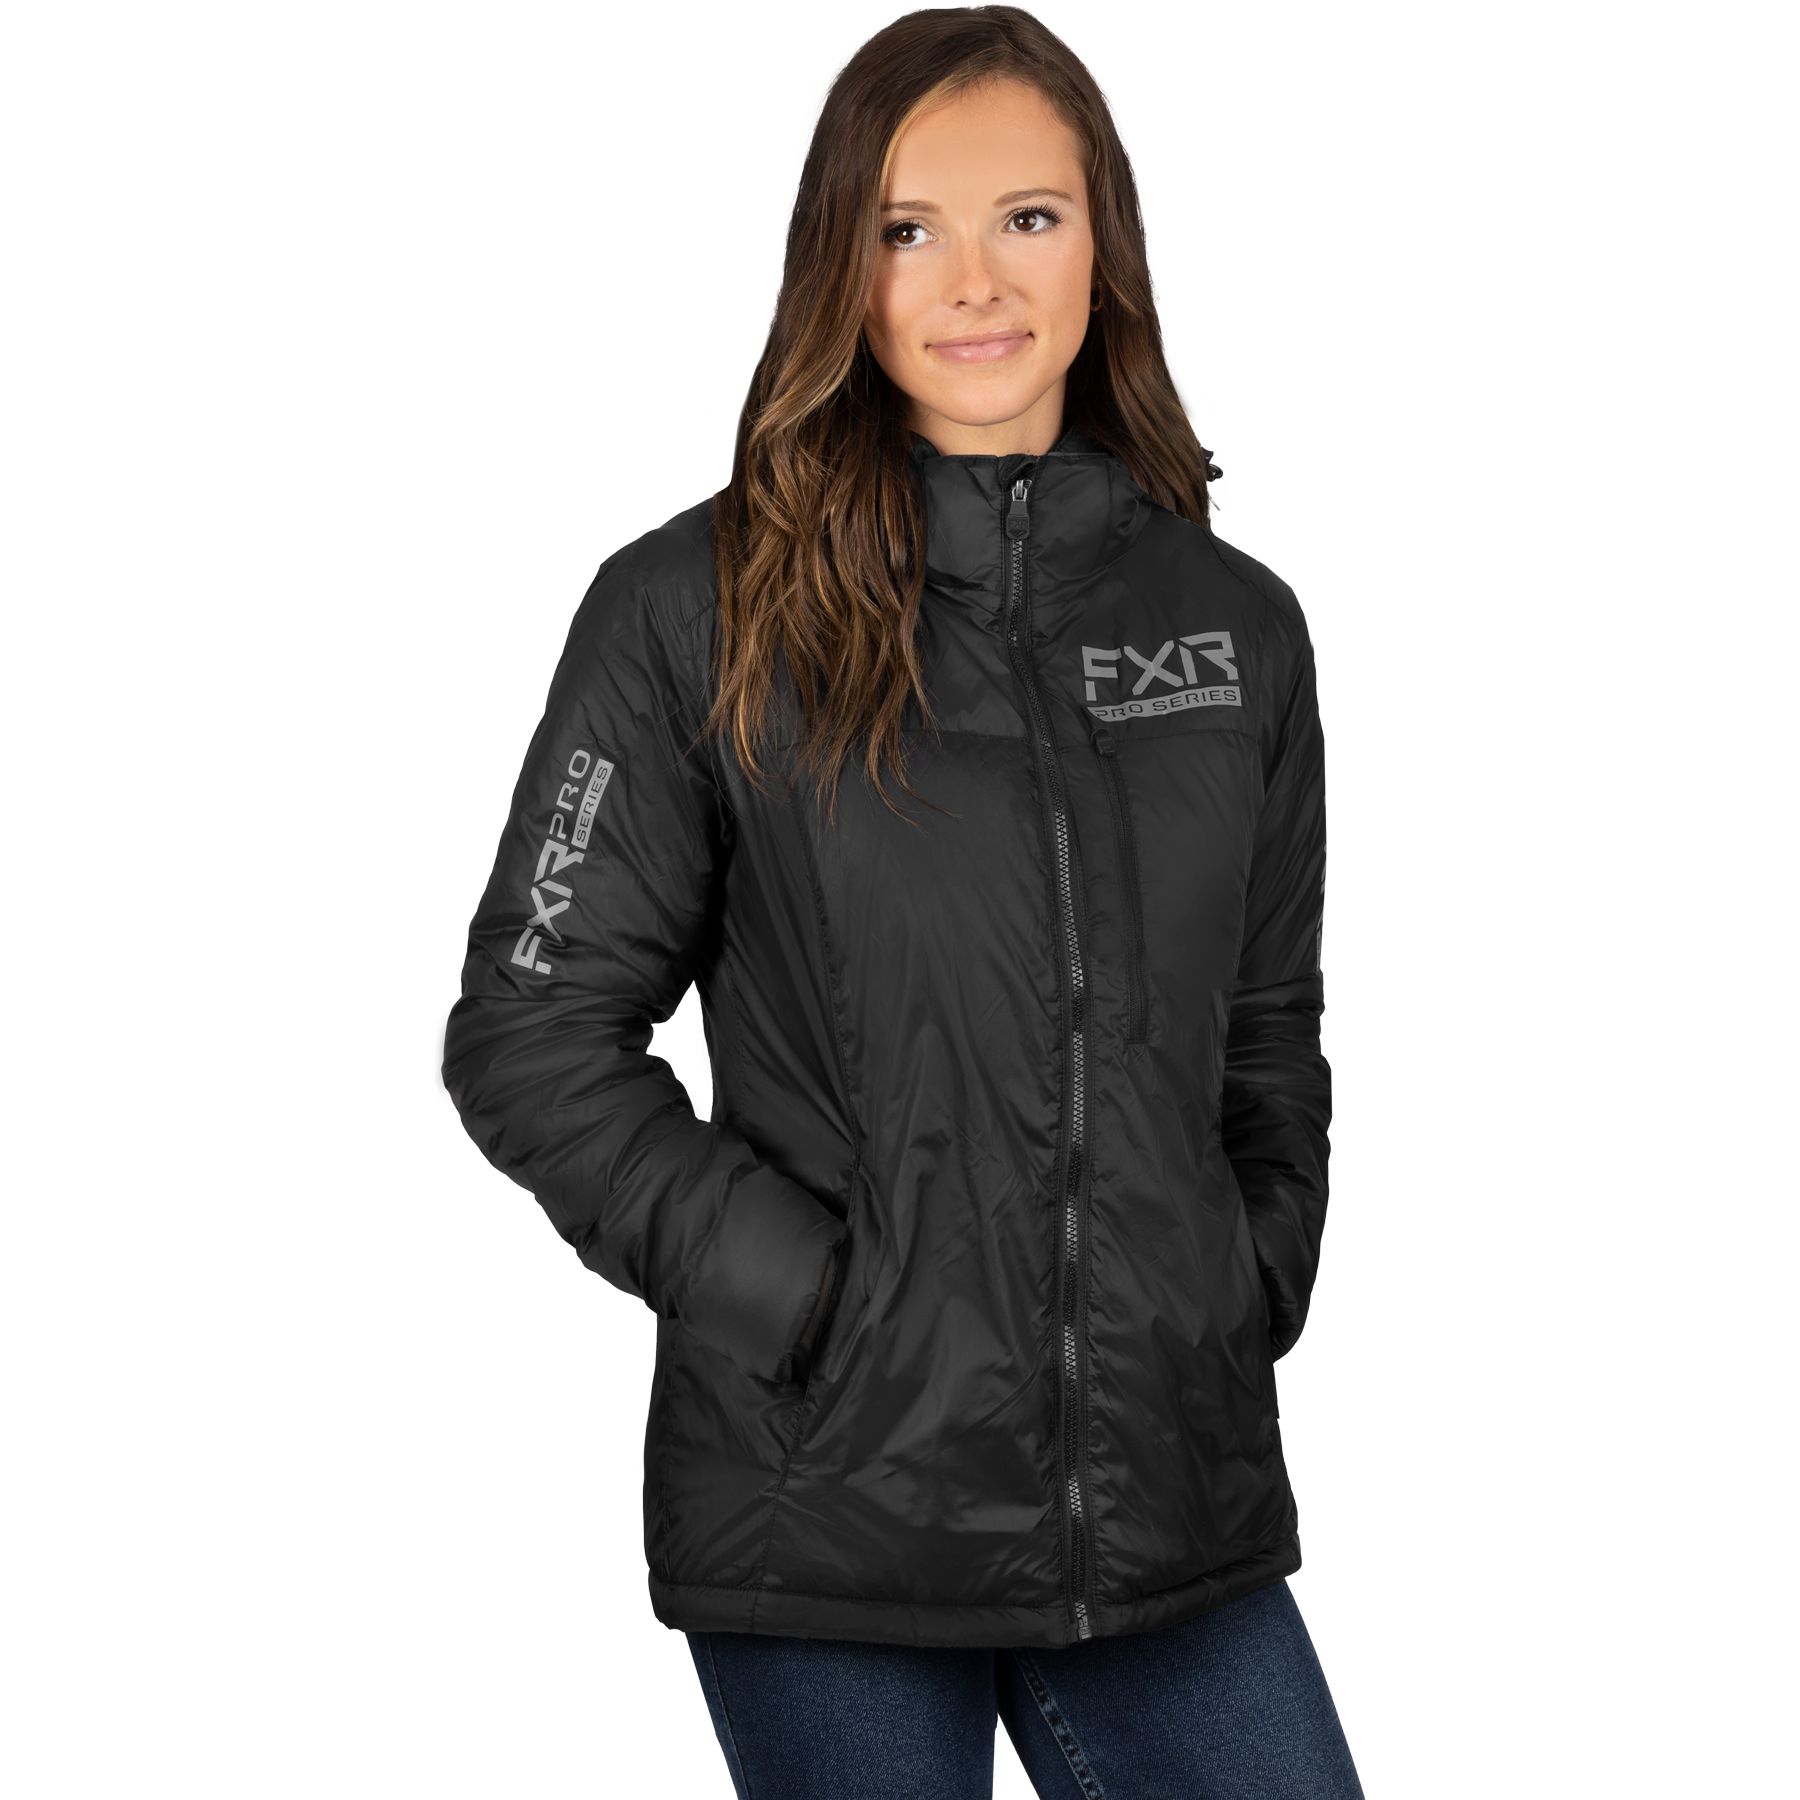 fxr racing jackets  expedition lite  jackets - casual